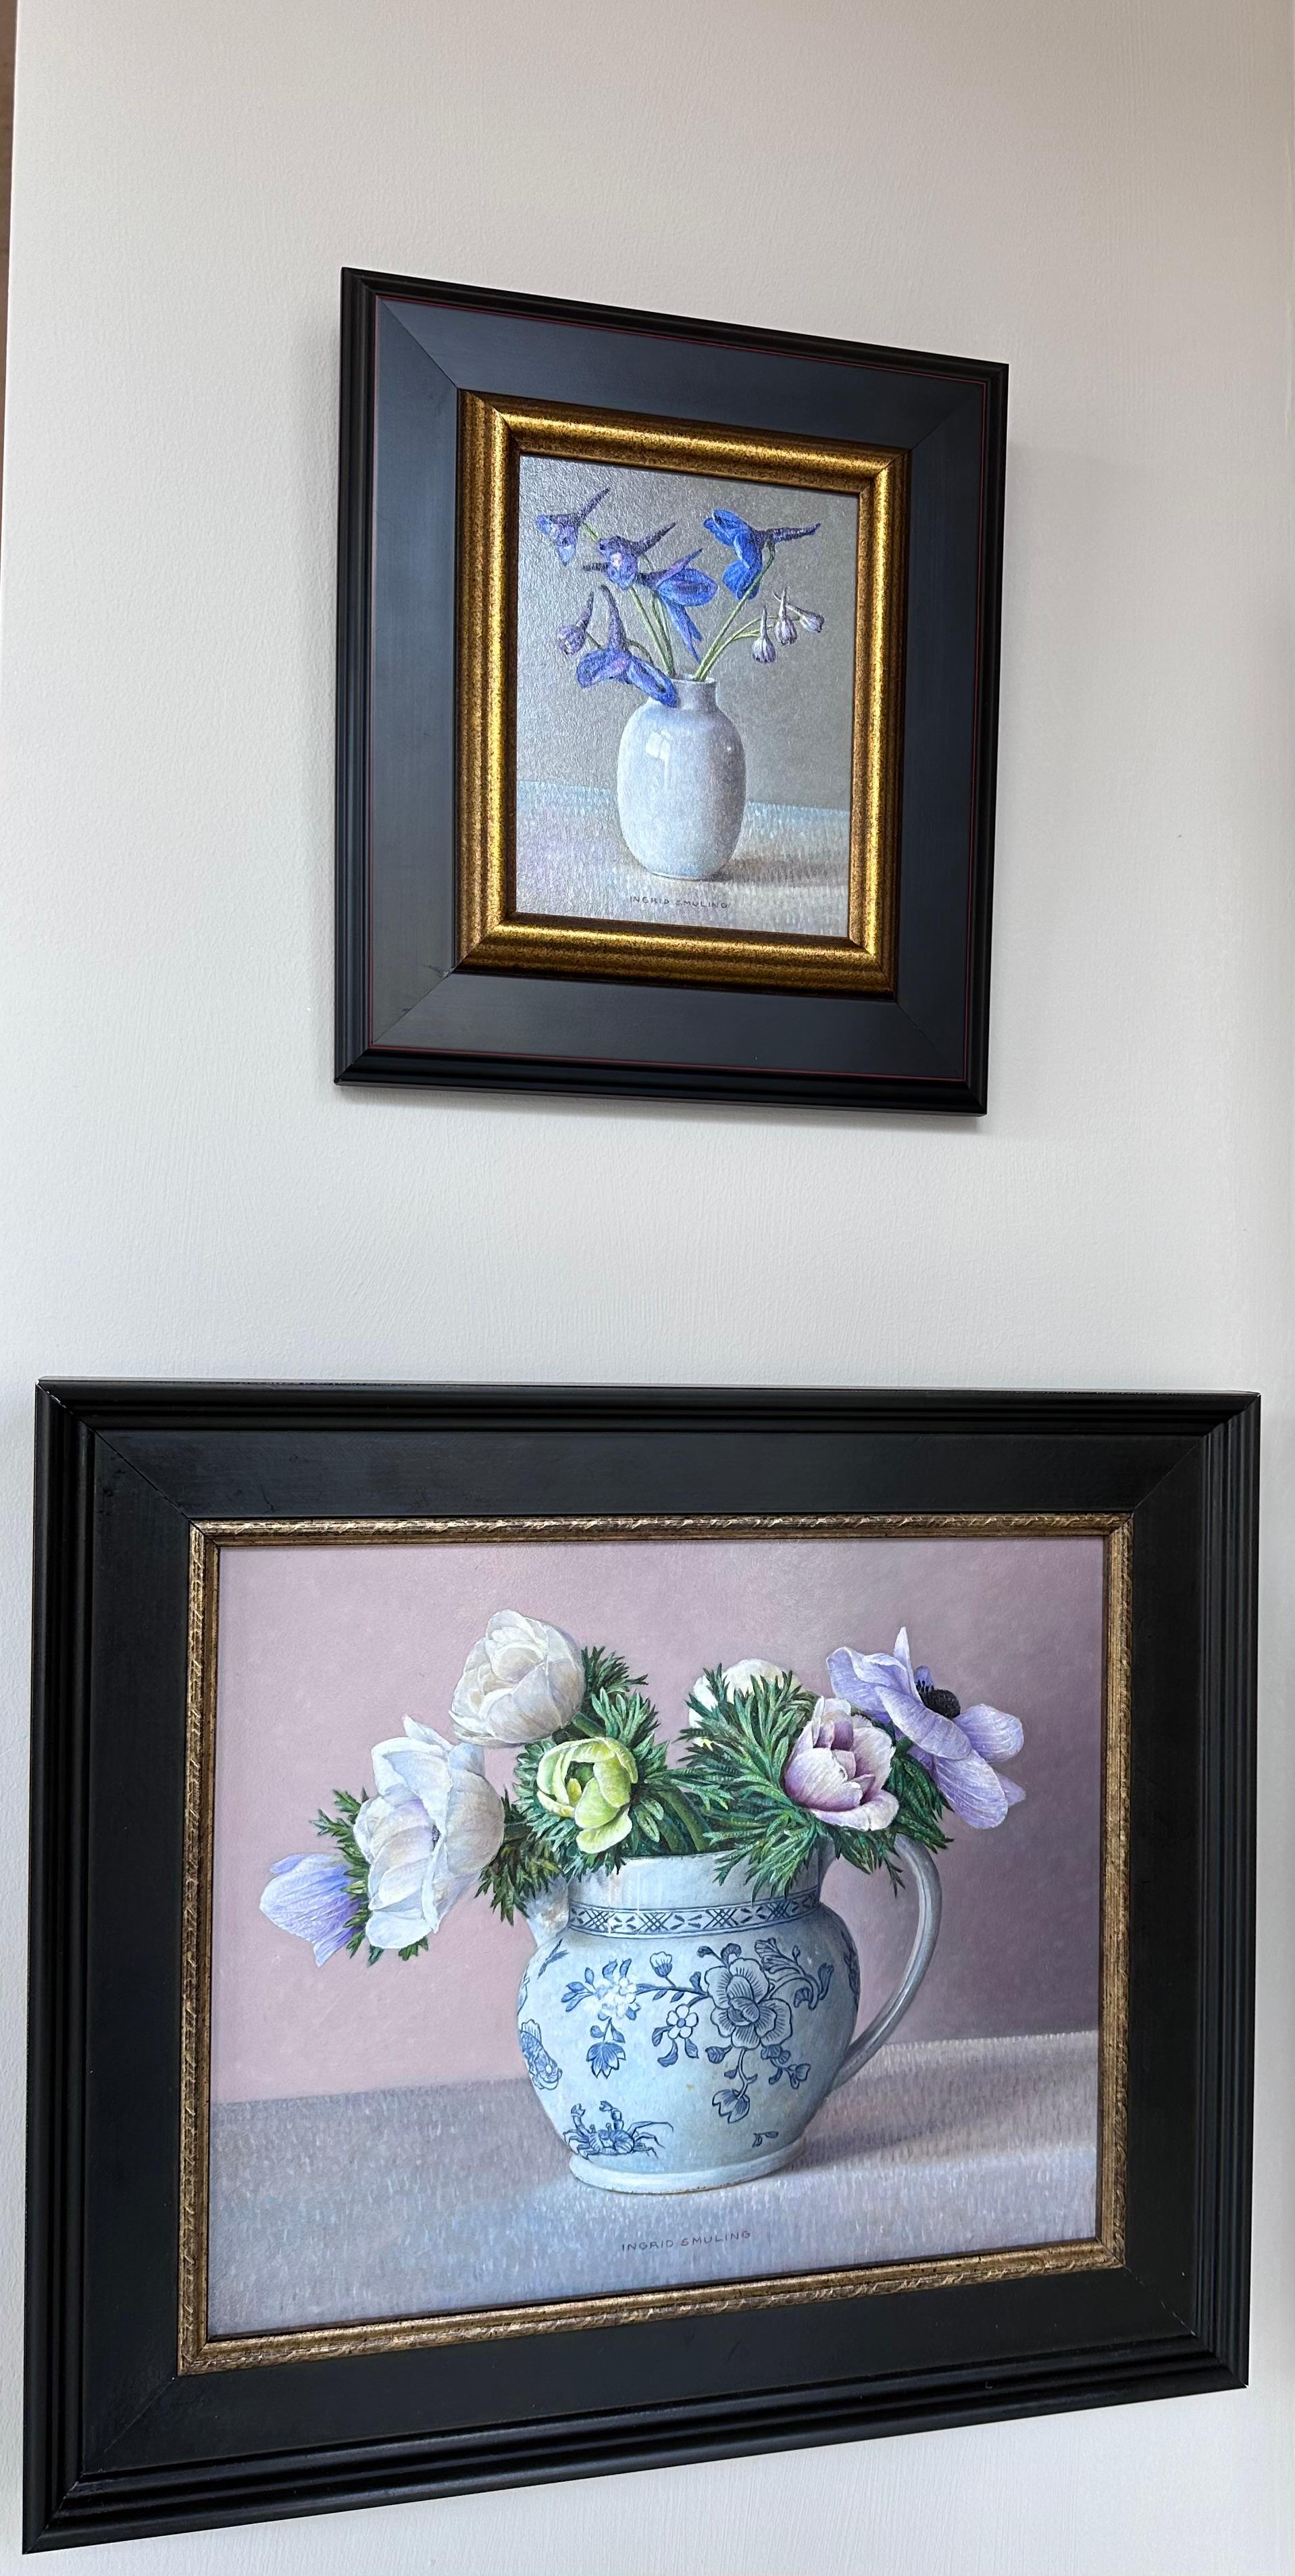 Ingrid Smuling 
Wedgewood Eturia with Anemones
25 x 30 cm olieverf, frame included in price. (Size with frame 34 x 39 cm)

Ingrid Smuling, the Grand Lady of Still life painting is still working every day at the age of almost 80 years.
Her small